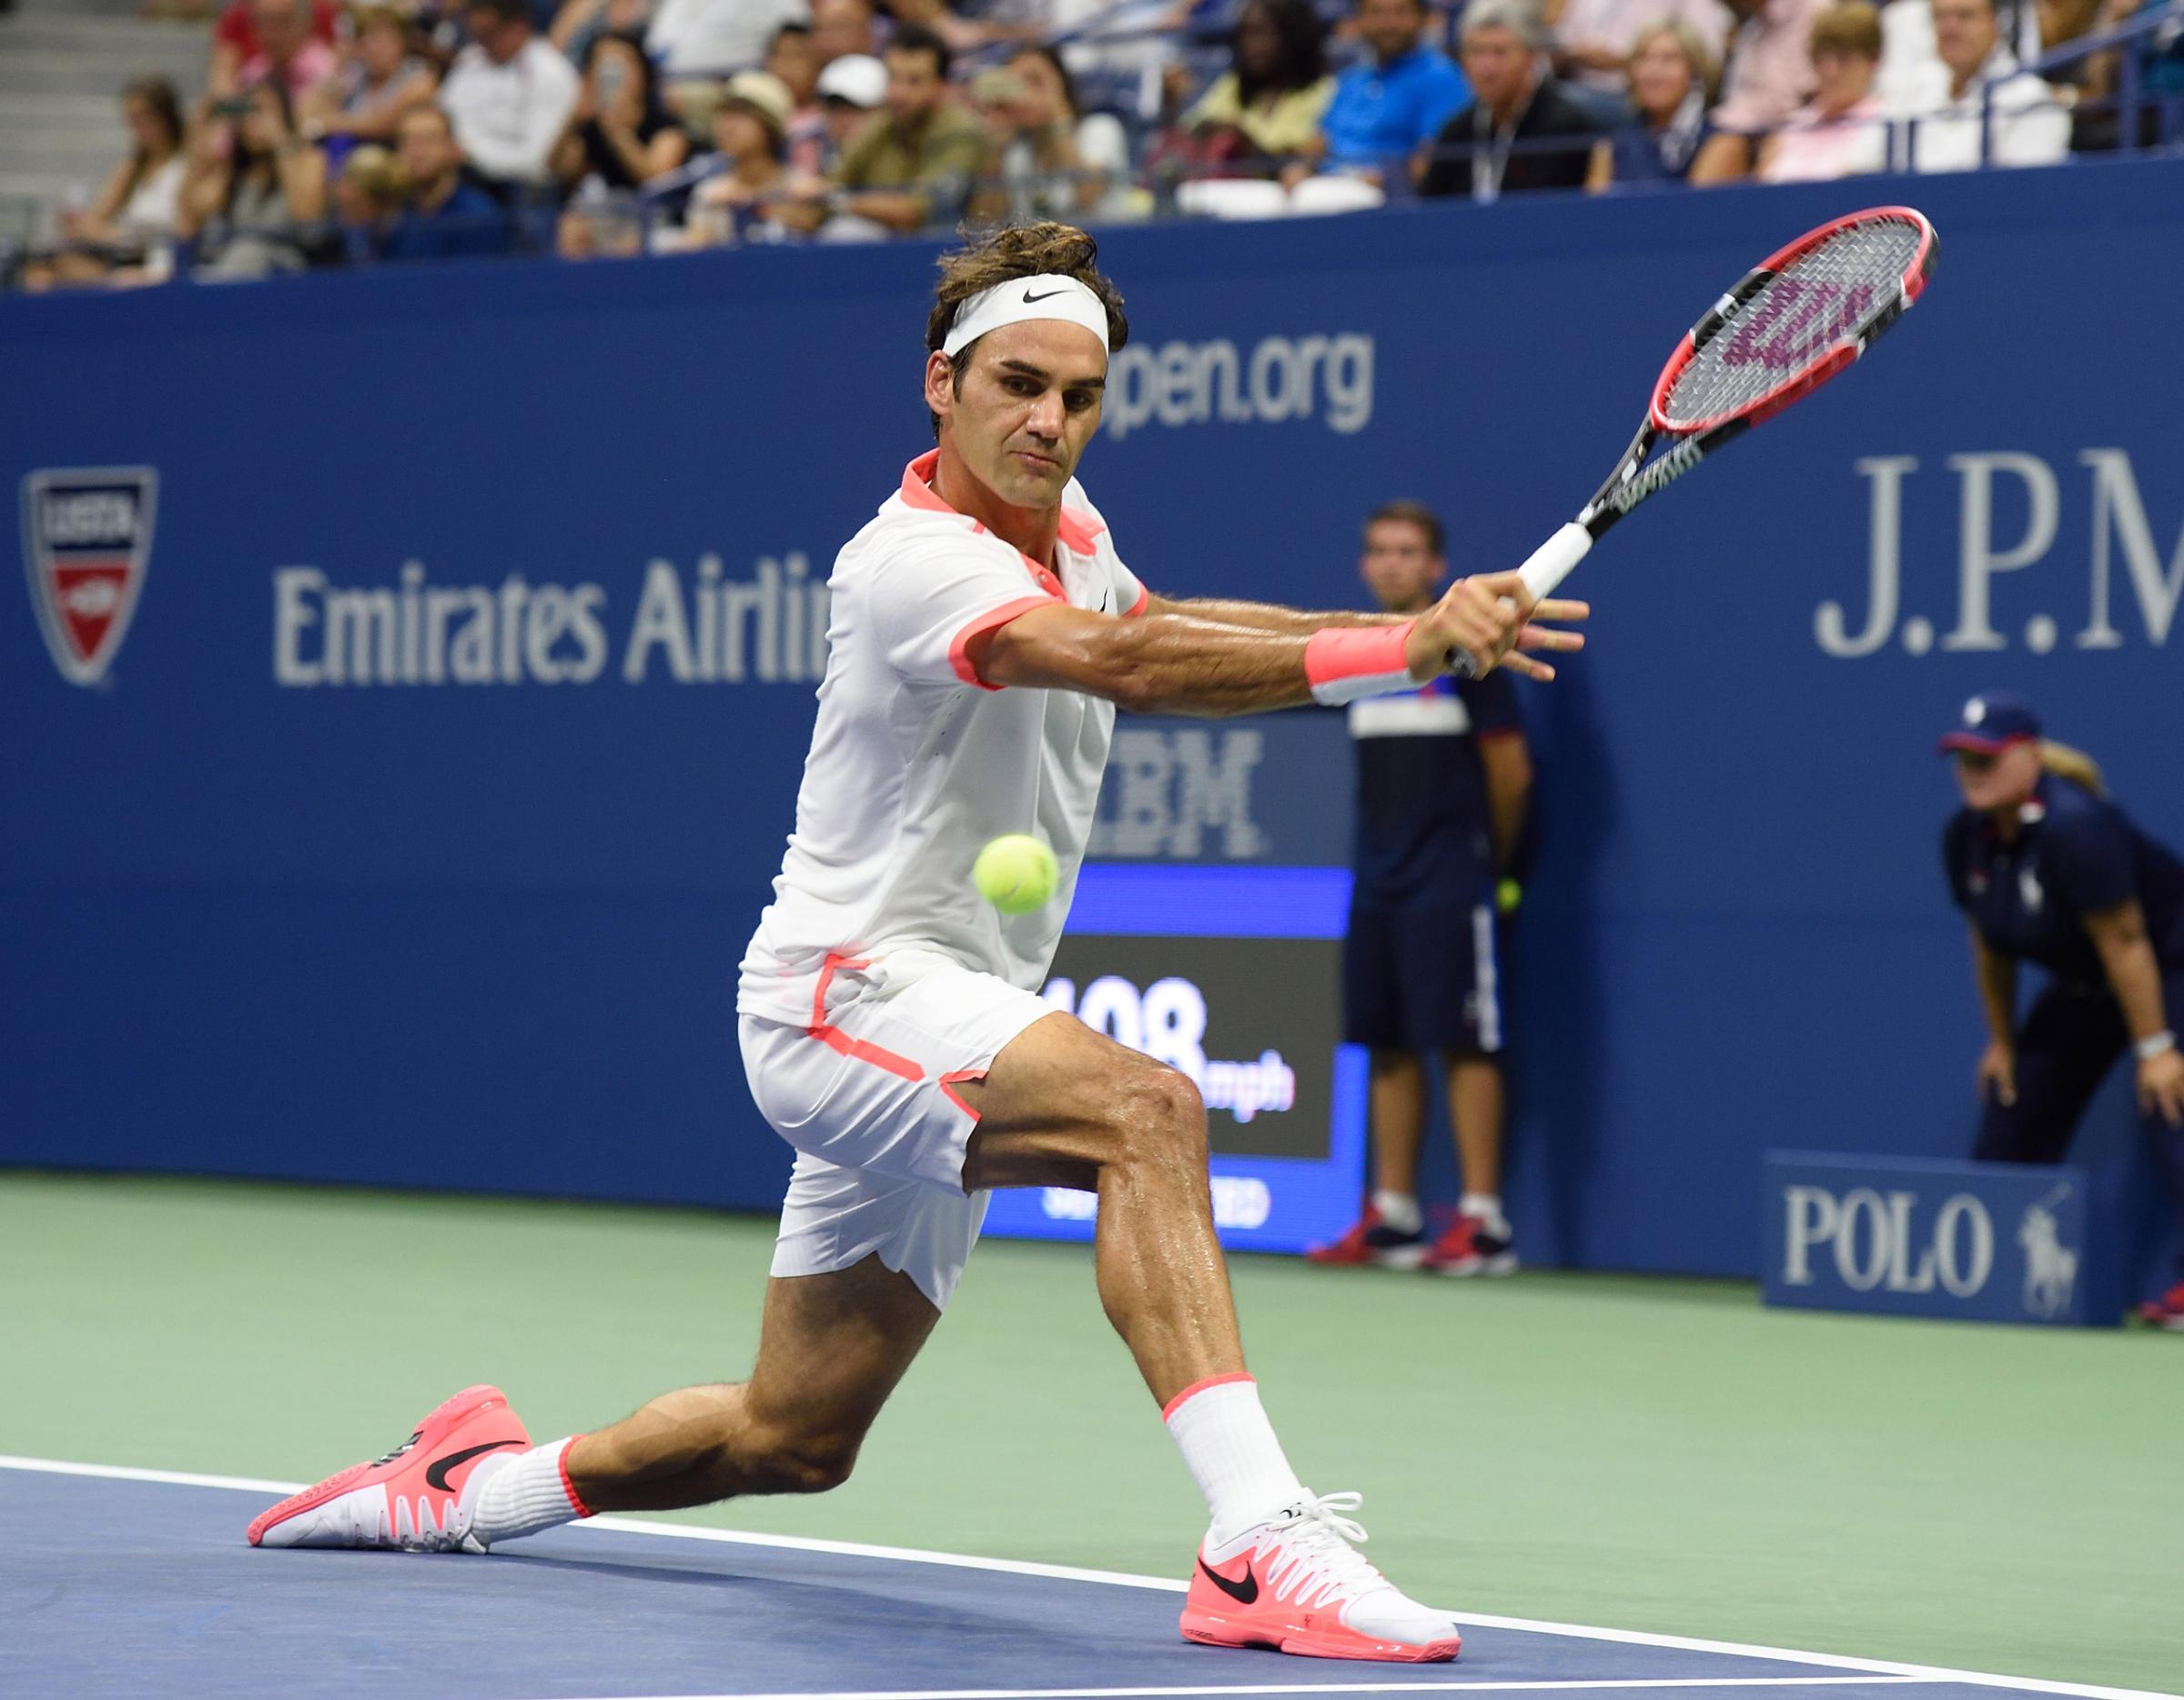 Roger Federer of Switzerland hits a return to Steve Darcis of Belgium during the 2015 US Open men's singles round two match at the USTA Billie Jean King National Tennis Center September 3, 2015 in New York. AFP PHOTO / DON EMMERT (Photo credit should read DON EMMERT/AFP/Getty Images)